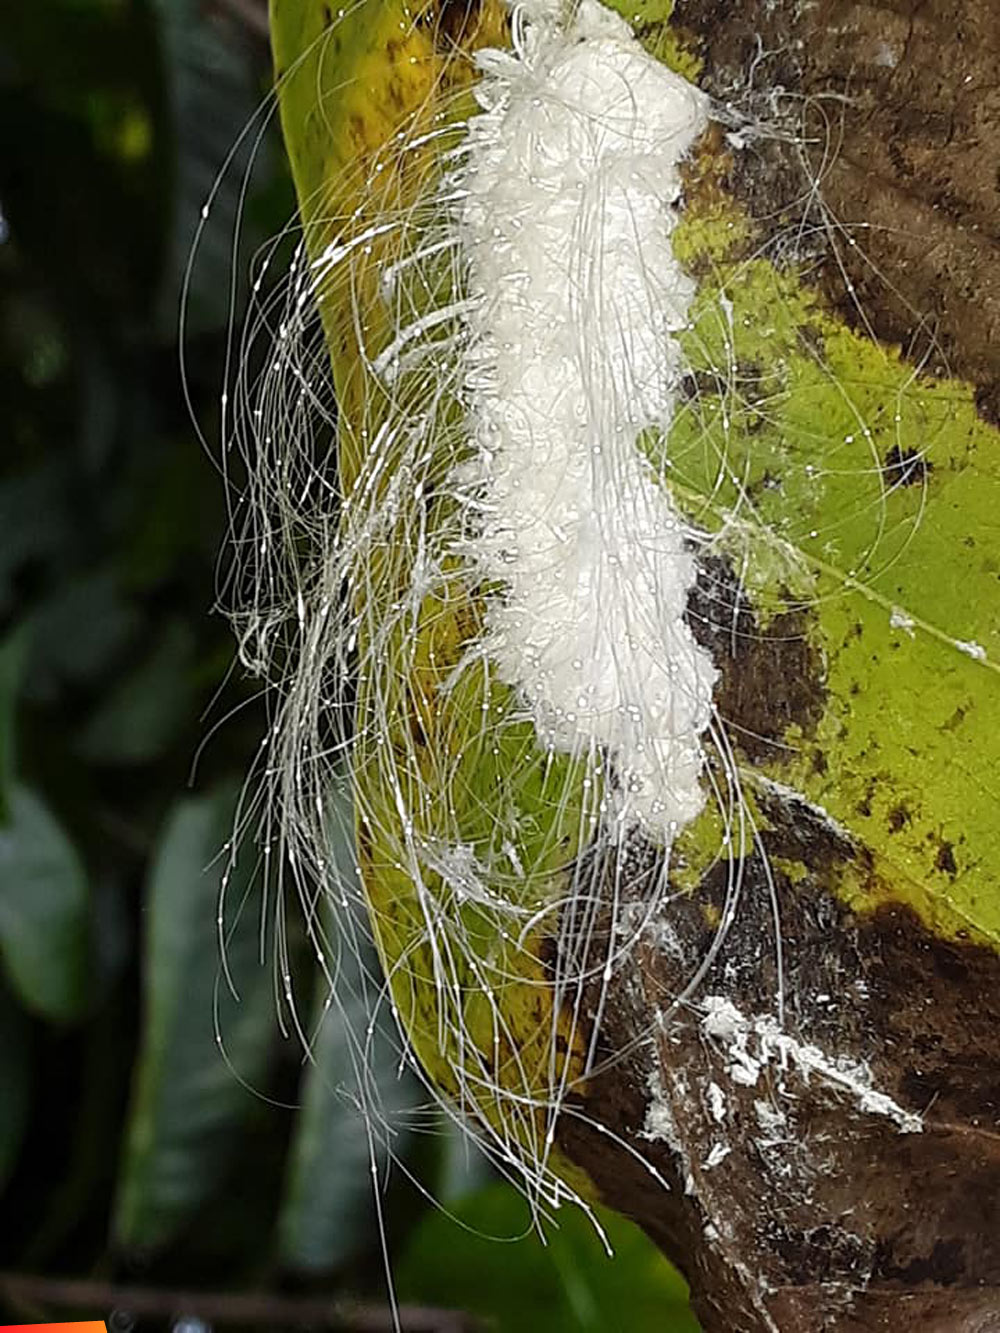 Mealy bug cocoon with long white hairs